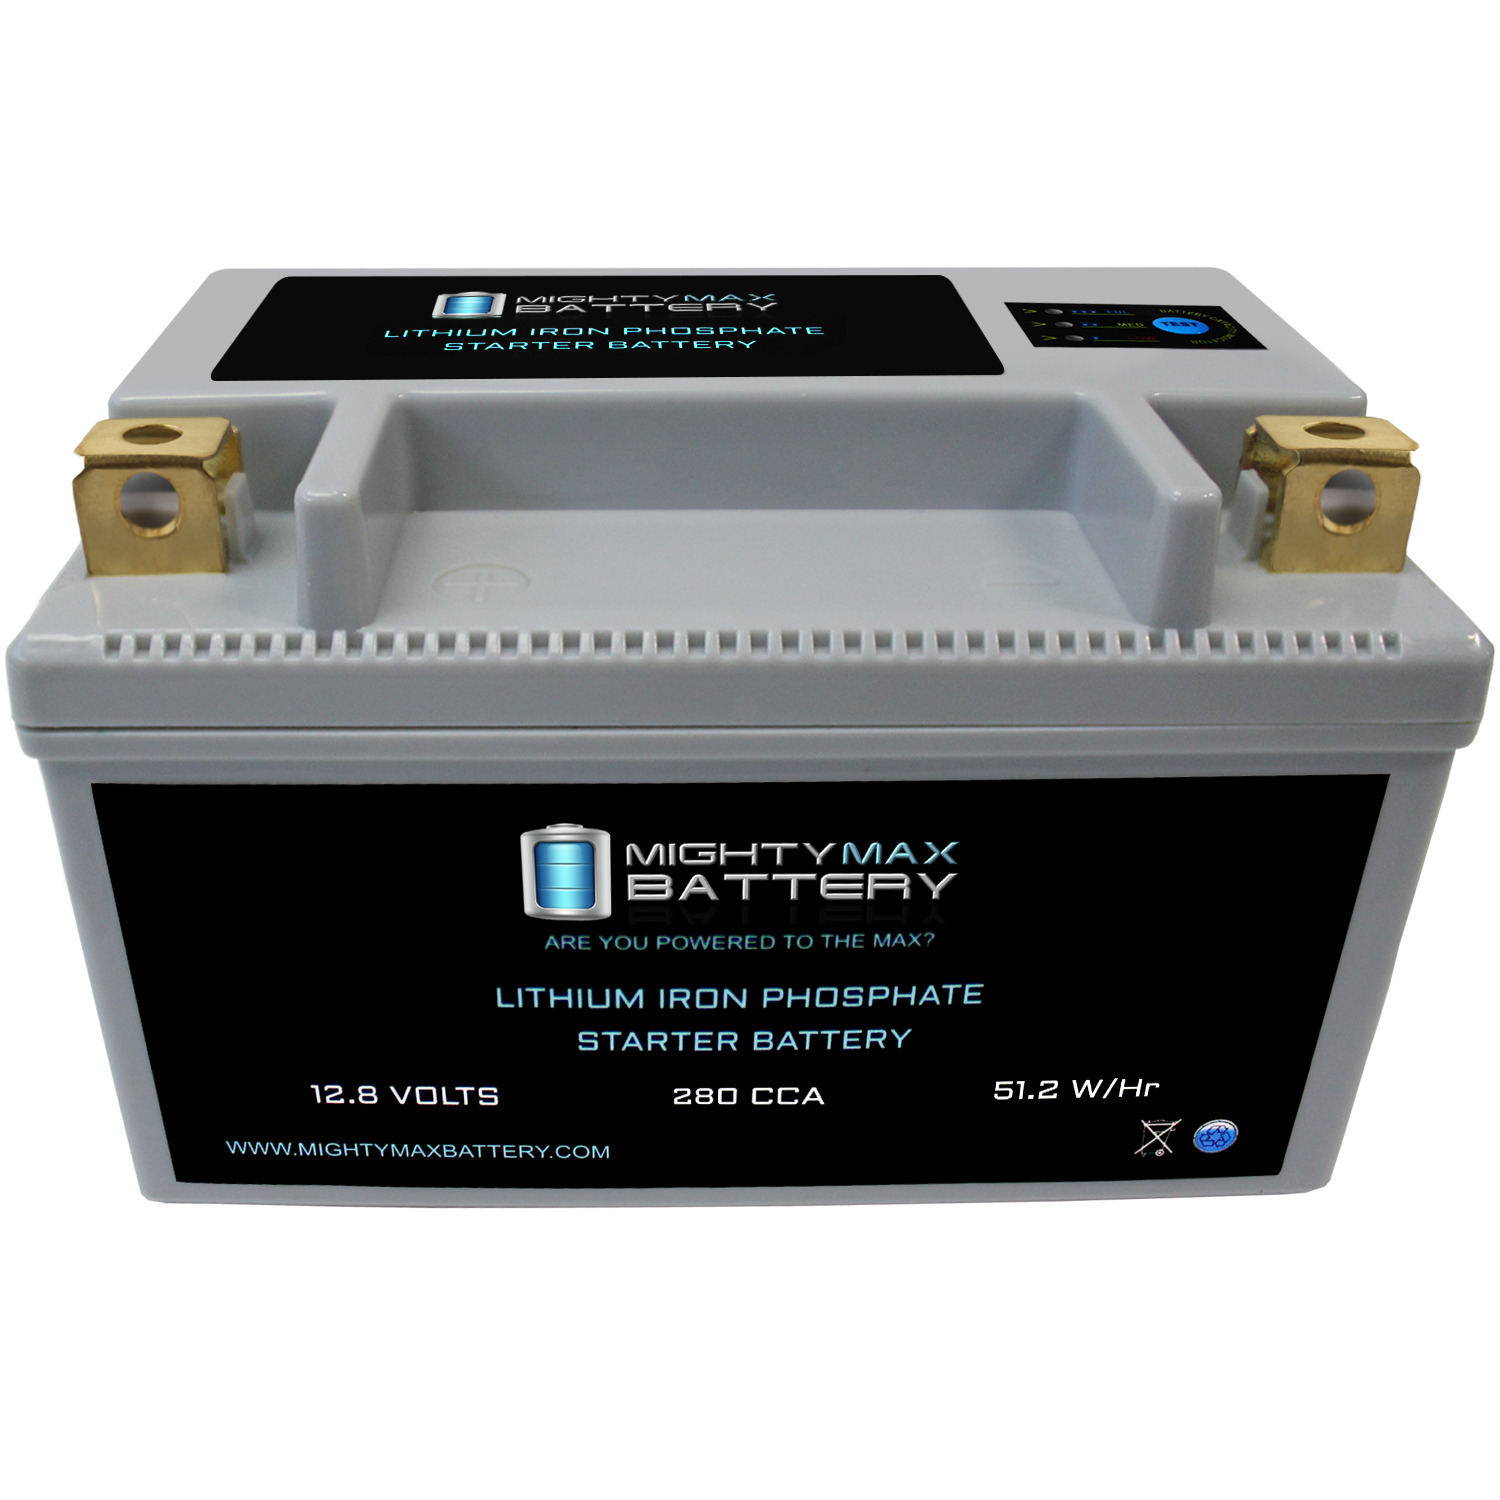 Lithium Motorcycle Battery, YTX14-BS 